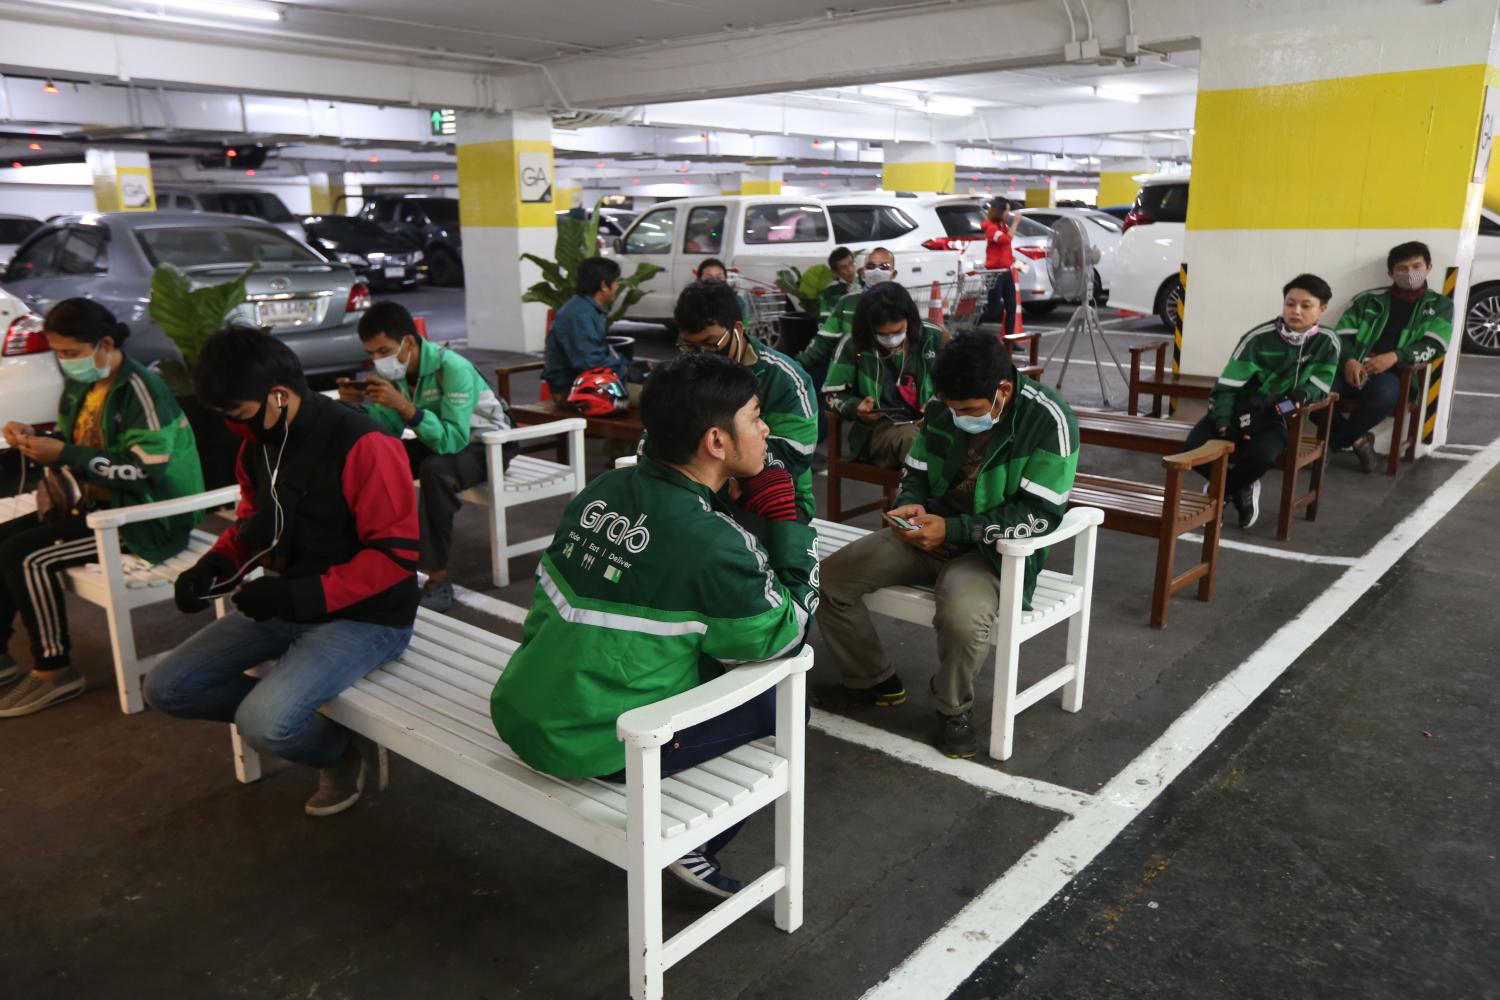 grab drivers protest in thailand